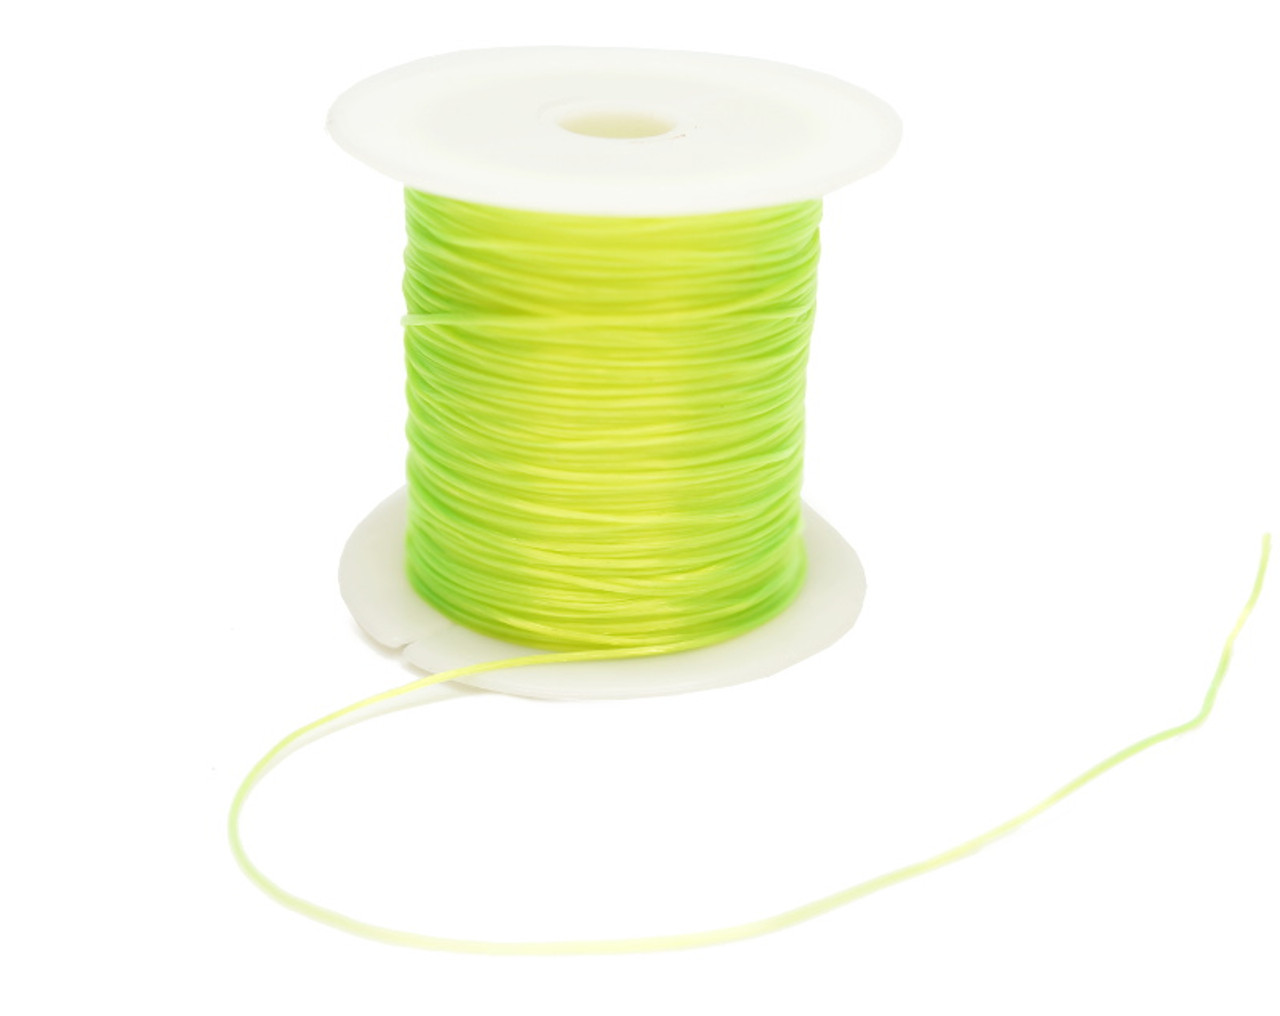 8 Yards Apple Green Strong & Stretchy Elastic Thread - Pack of 25 Spools